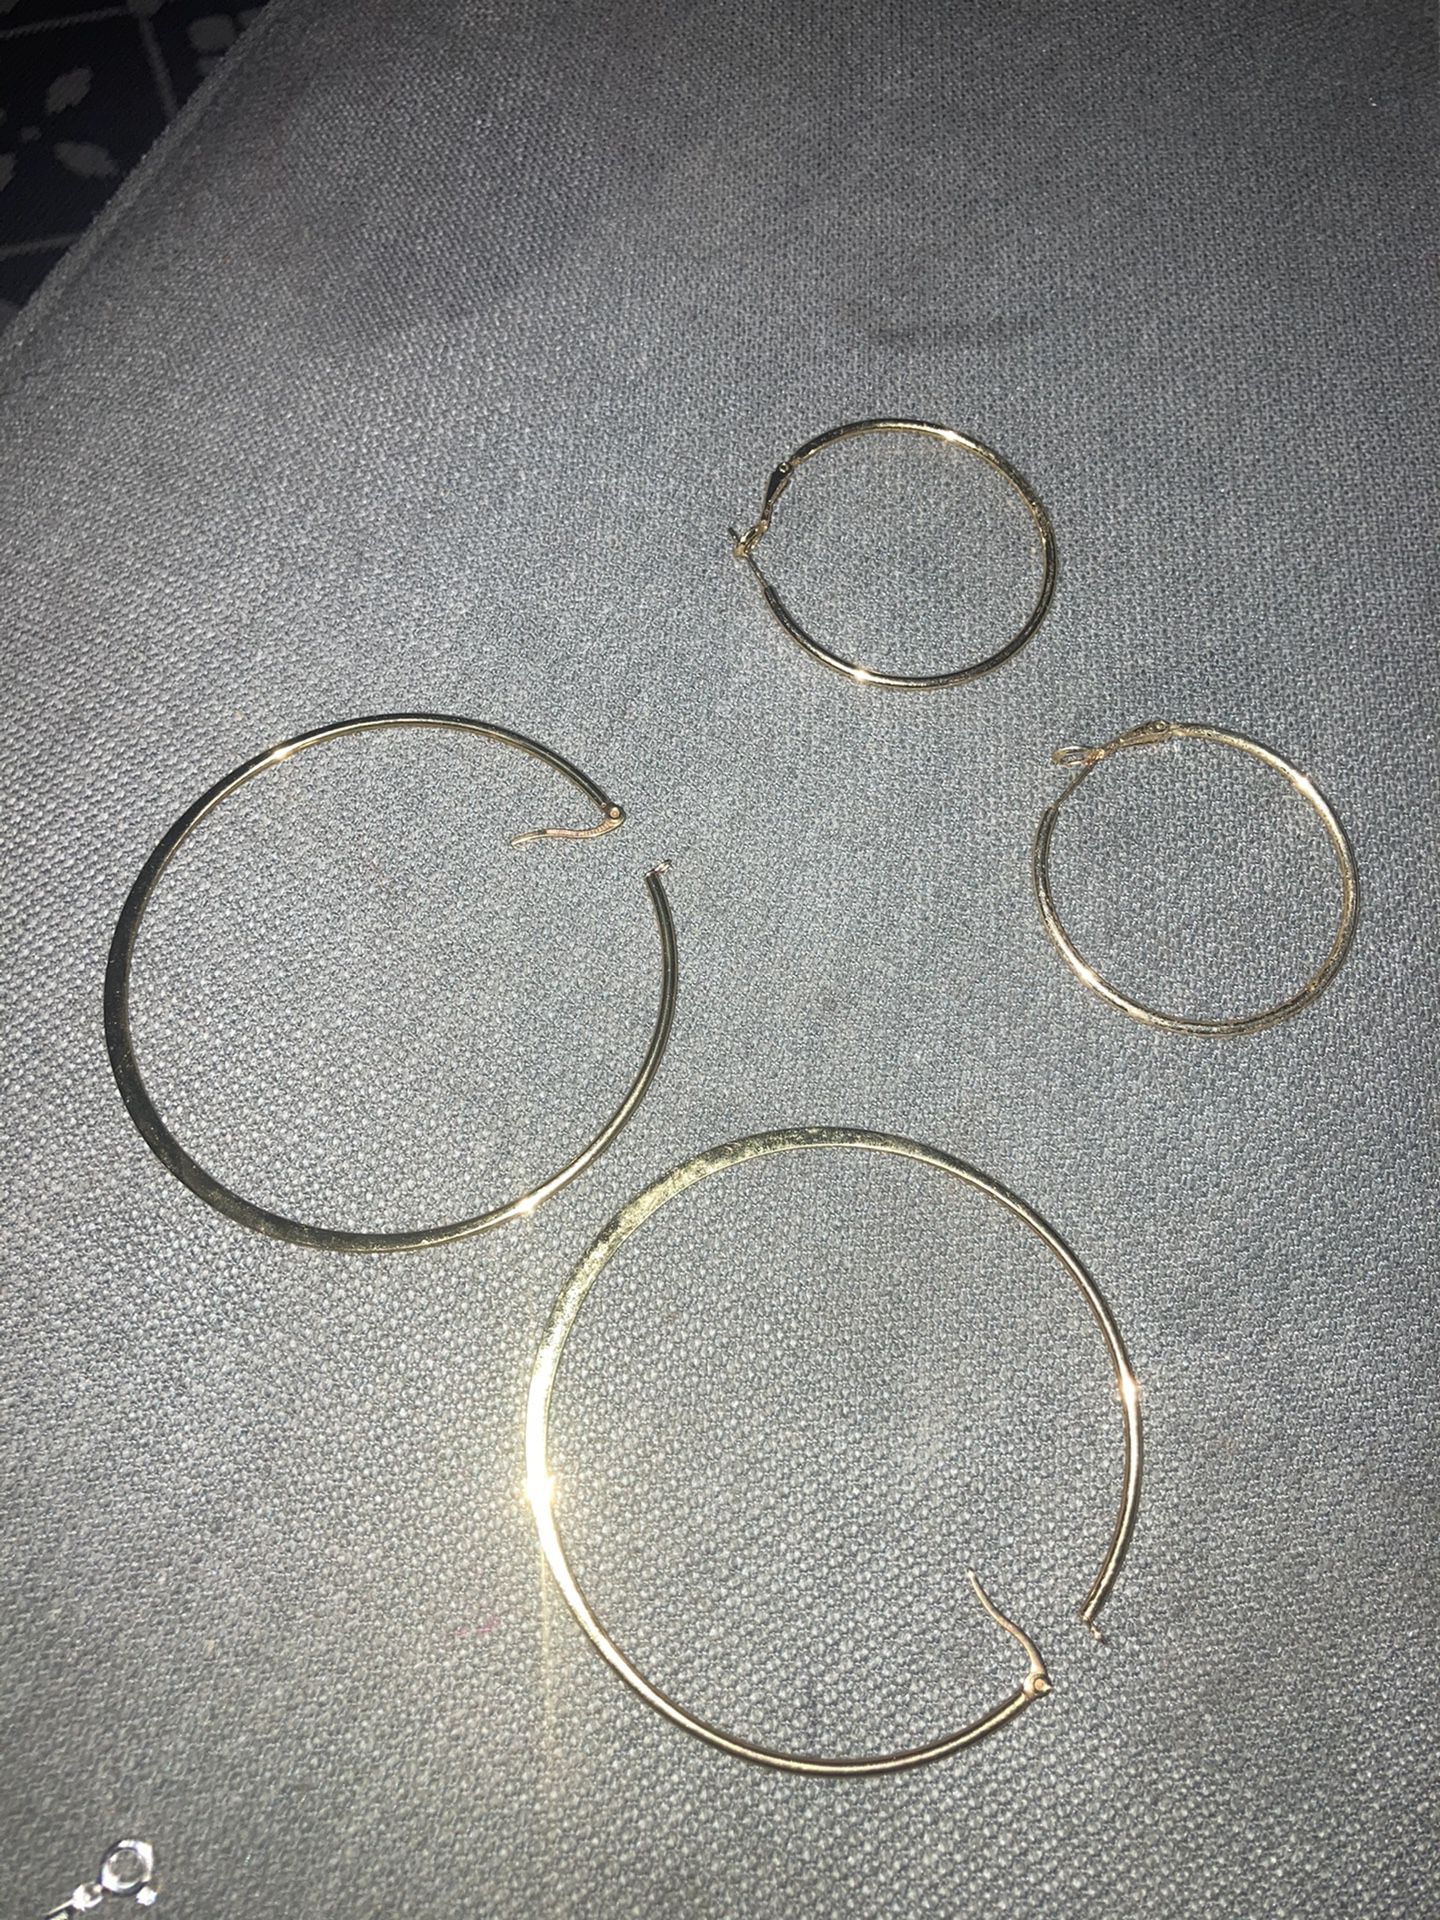 2 pair of gold plated hoop earrings 10$ for all